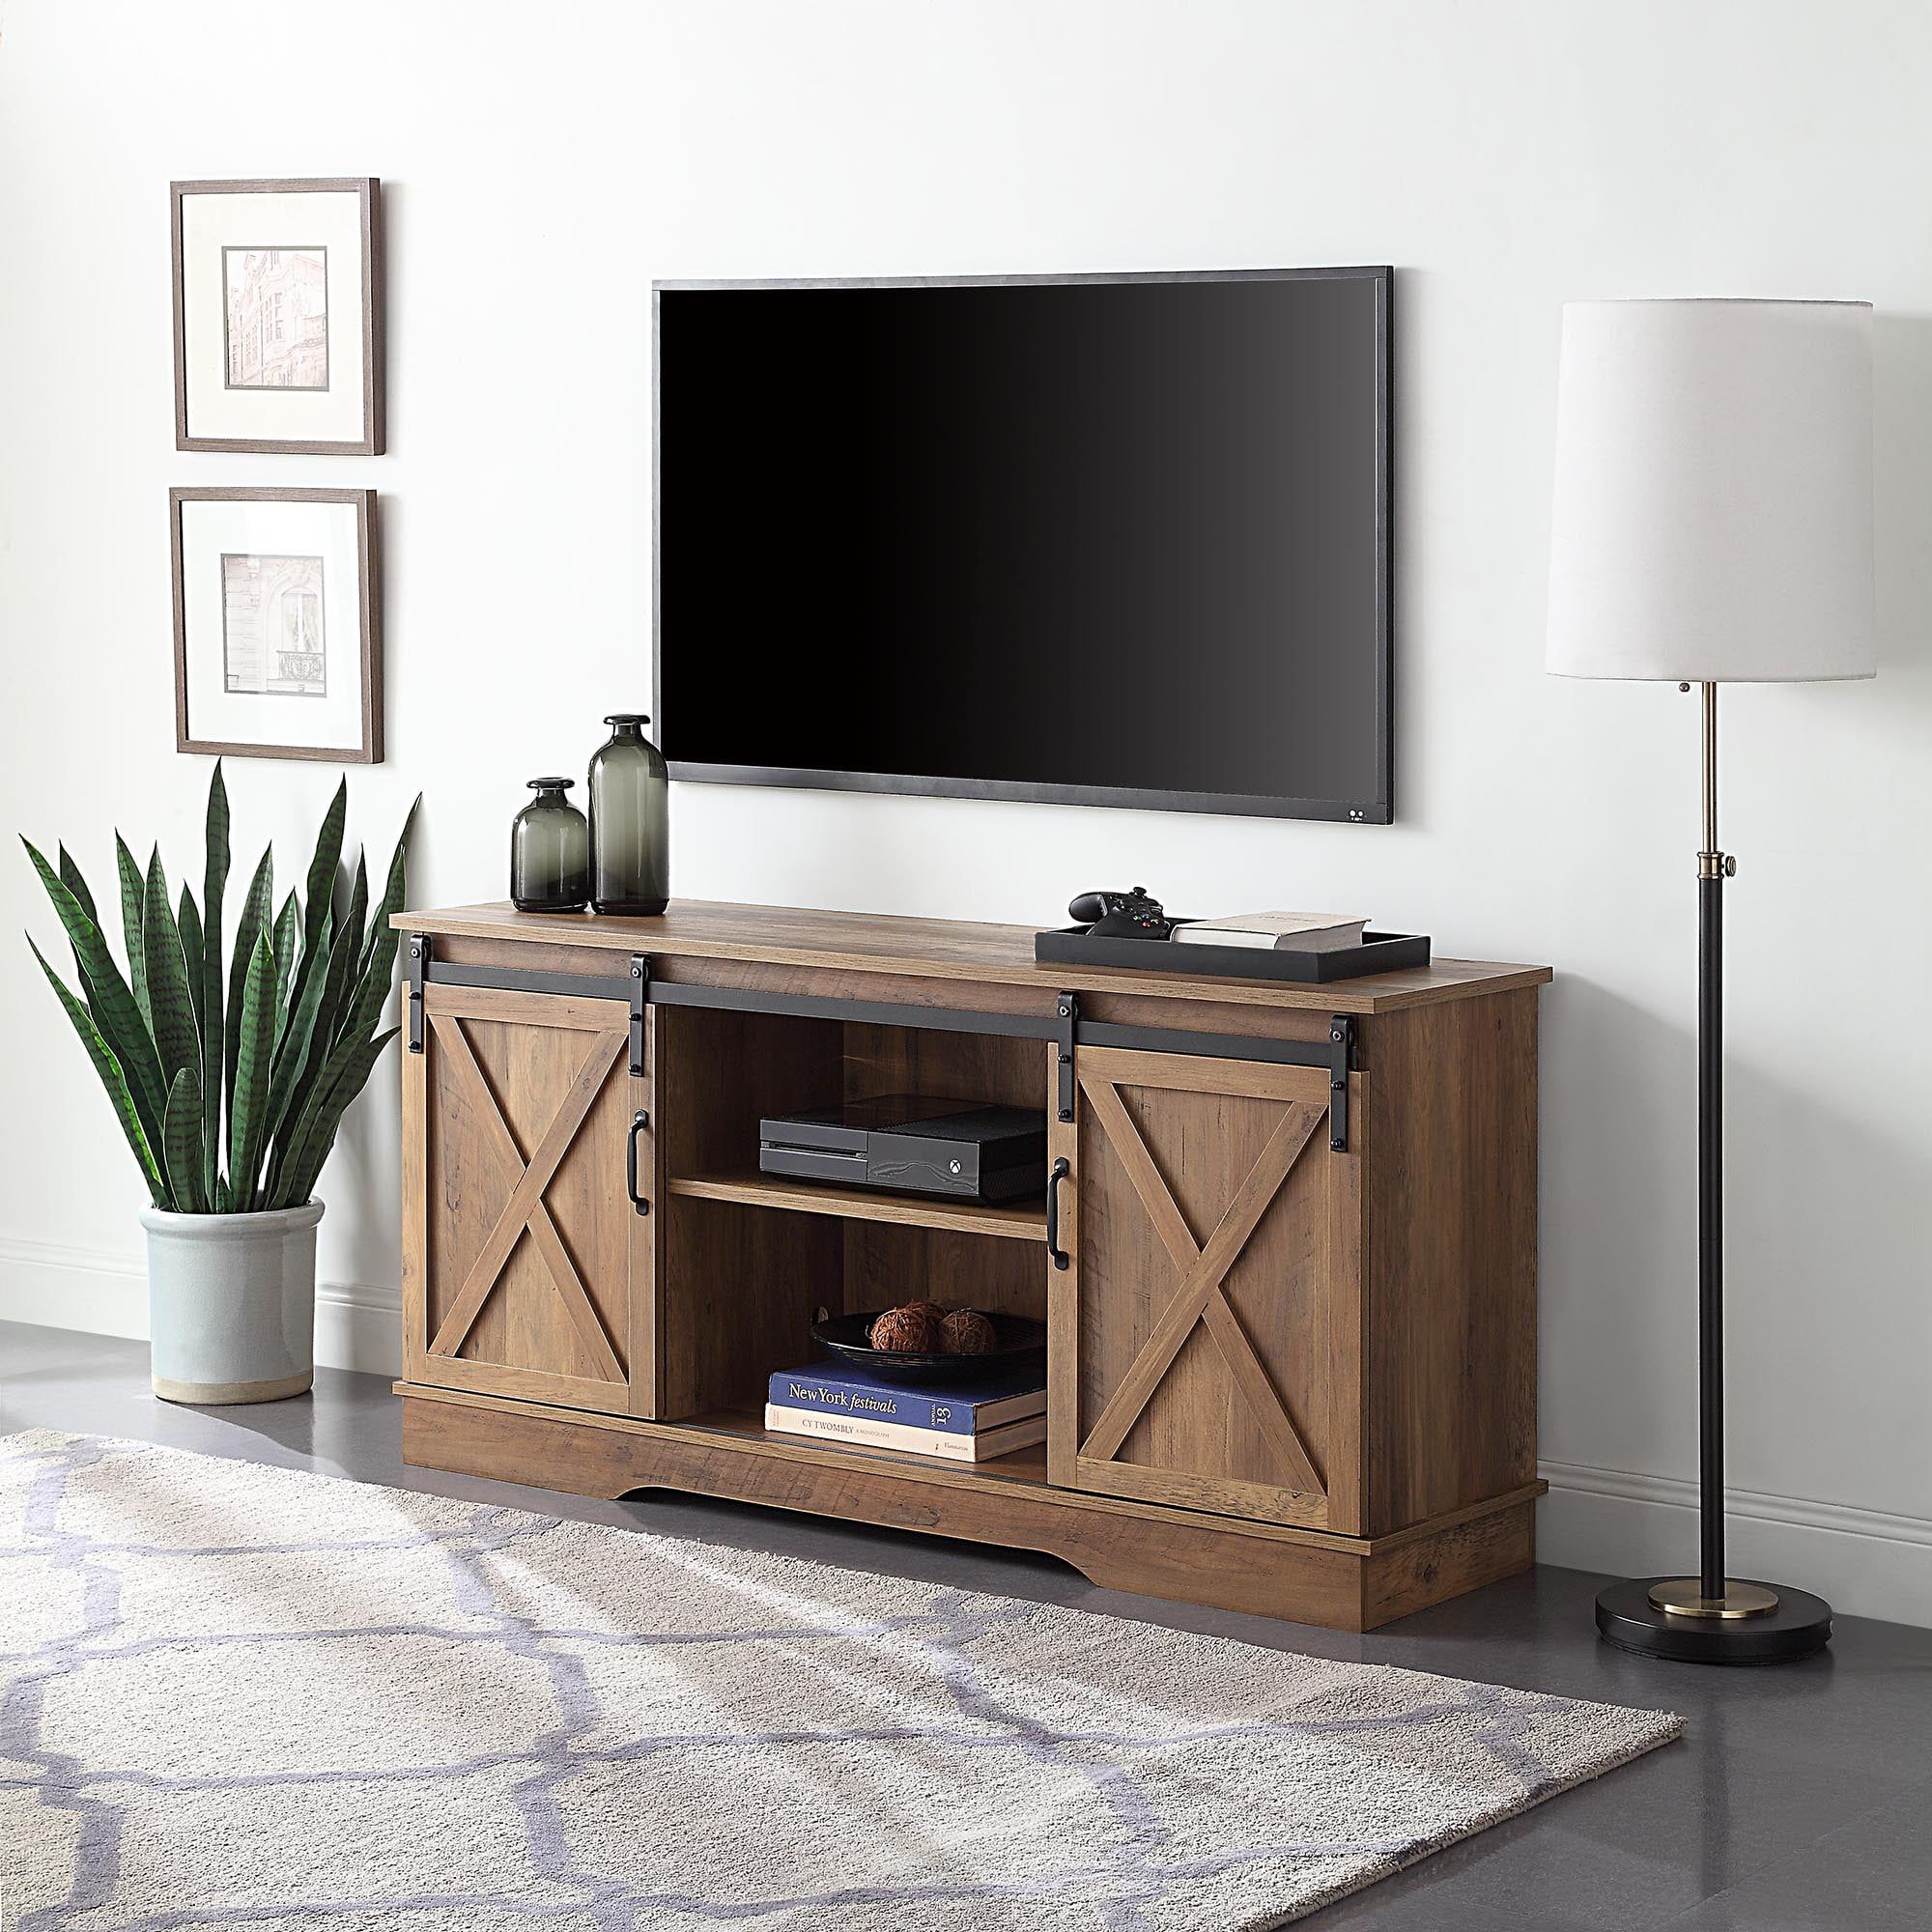 Belleze Modern Farmhouse Style 58 Inch Tv Stand With Sliding Barn Door In Modern Farmhouse Barn Tv Stands (View 2 of 20)